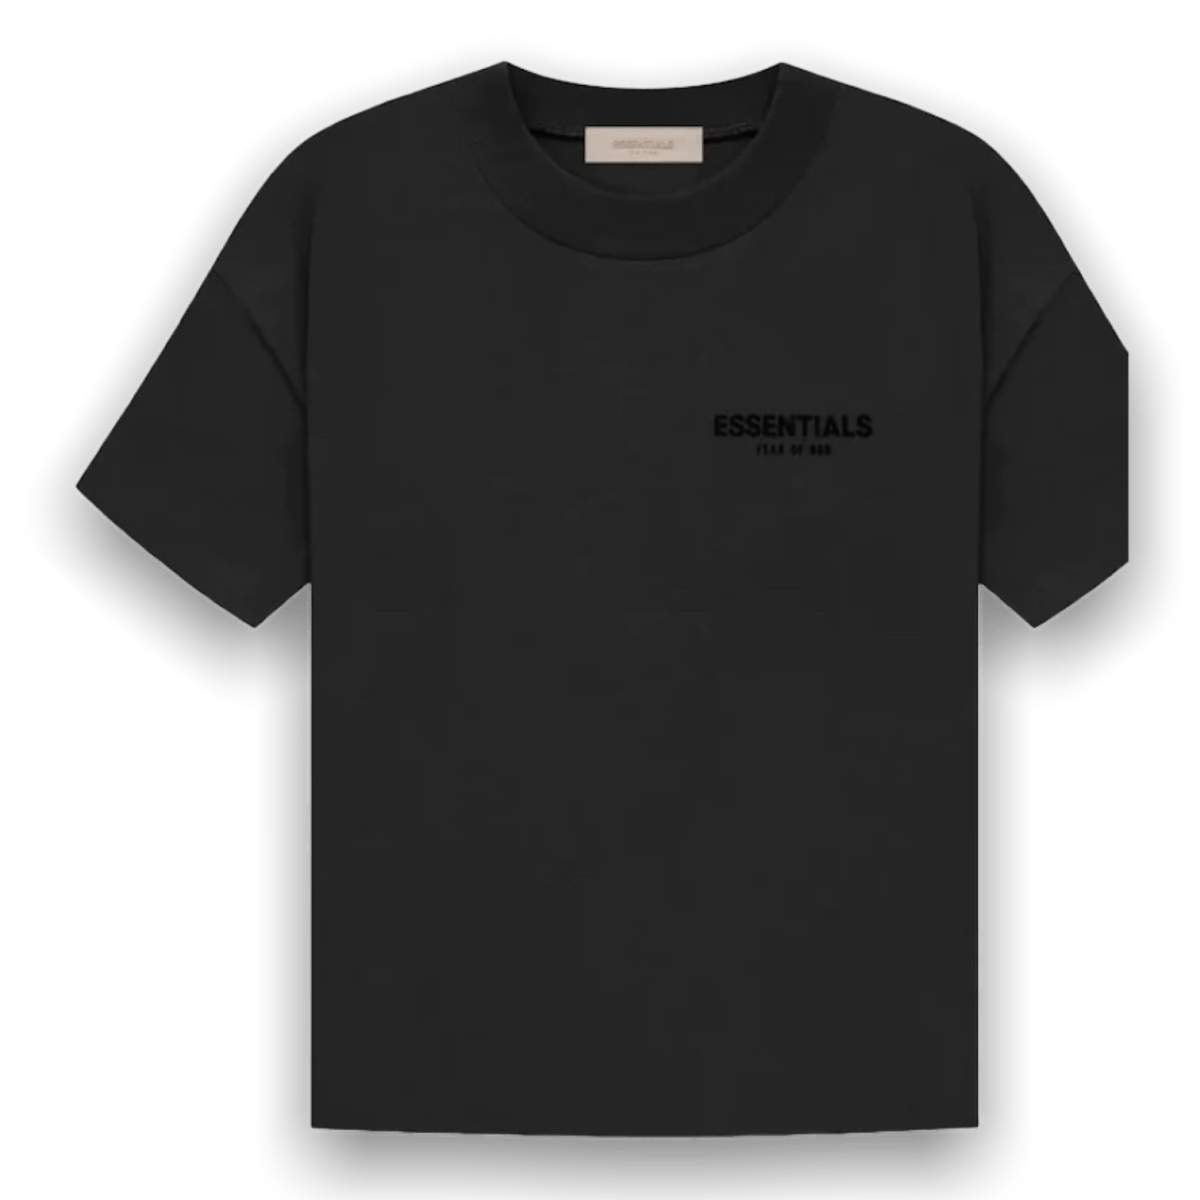 Essentials Short Sleeve Cotton Stretch Limo Black T-Shirt (Felt Lettering) - T-Shirt - Jawns on Fire Sneakers & Streetwear